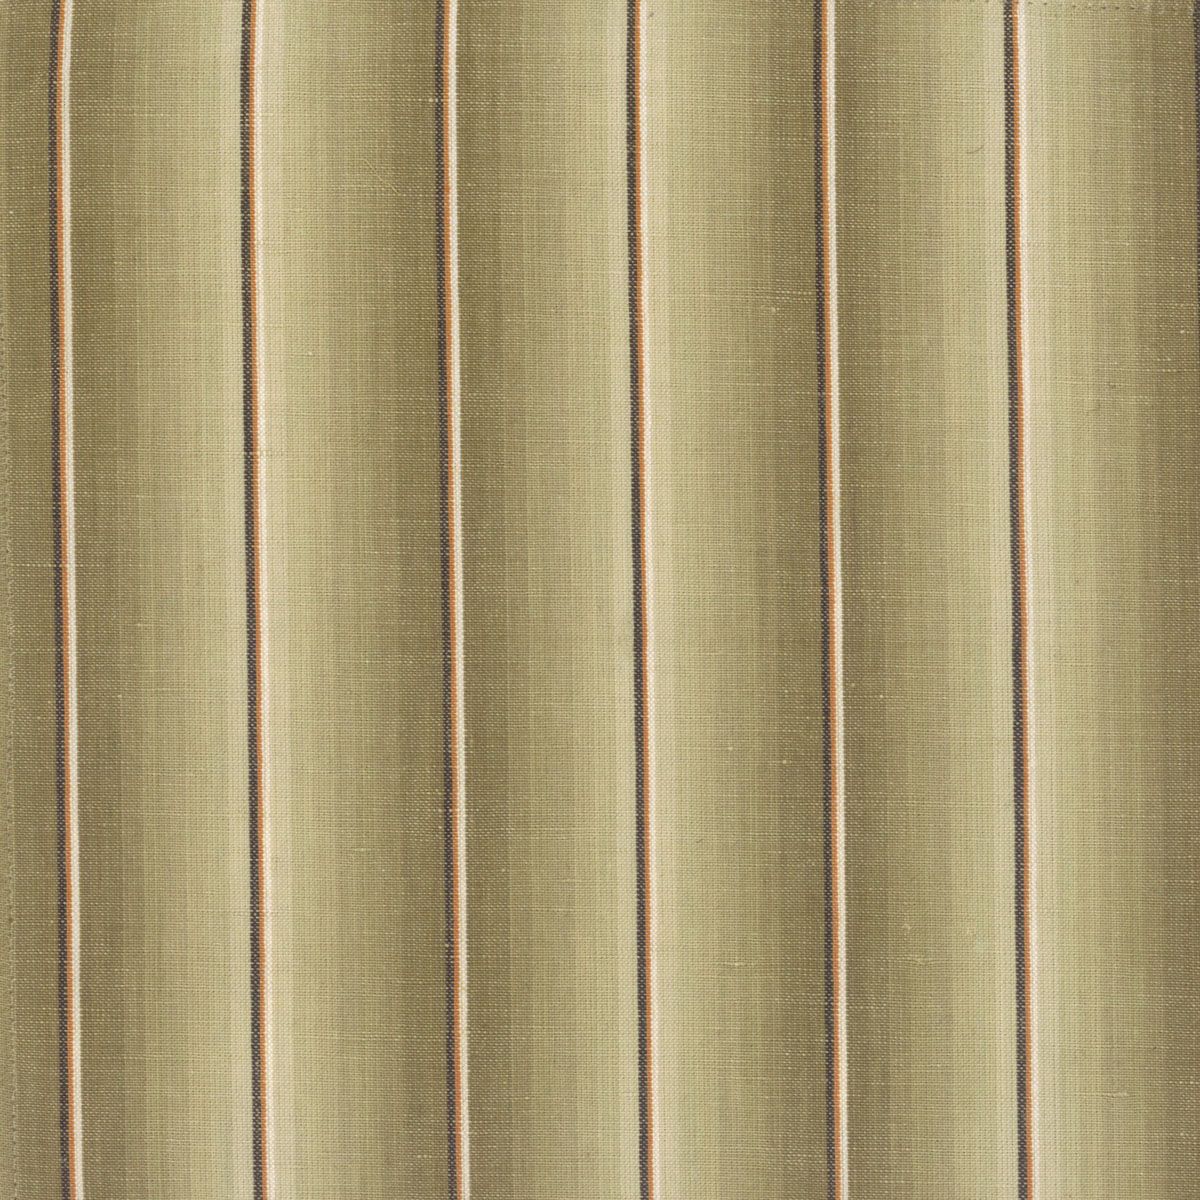 Lindy fabric in beige color - pattern number PQ 0002A550 - by Scalamandre in the Old World Weavers collection